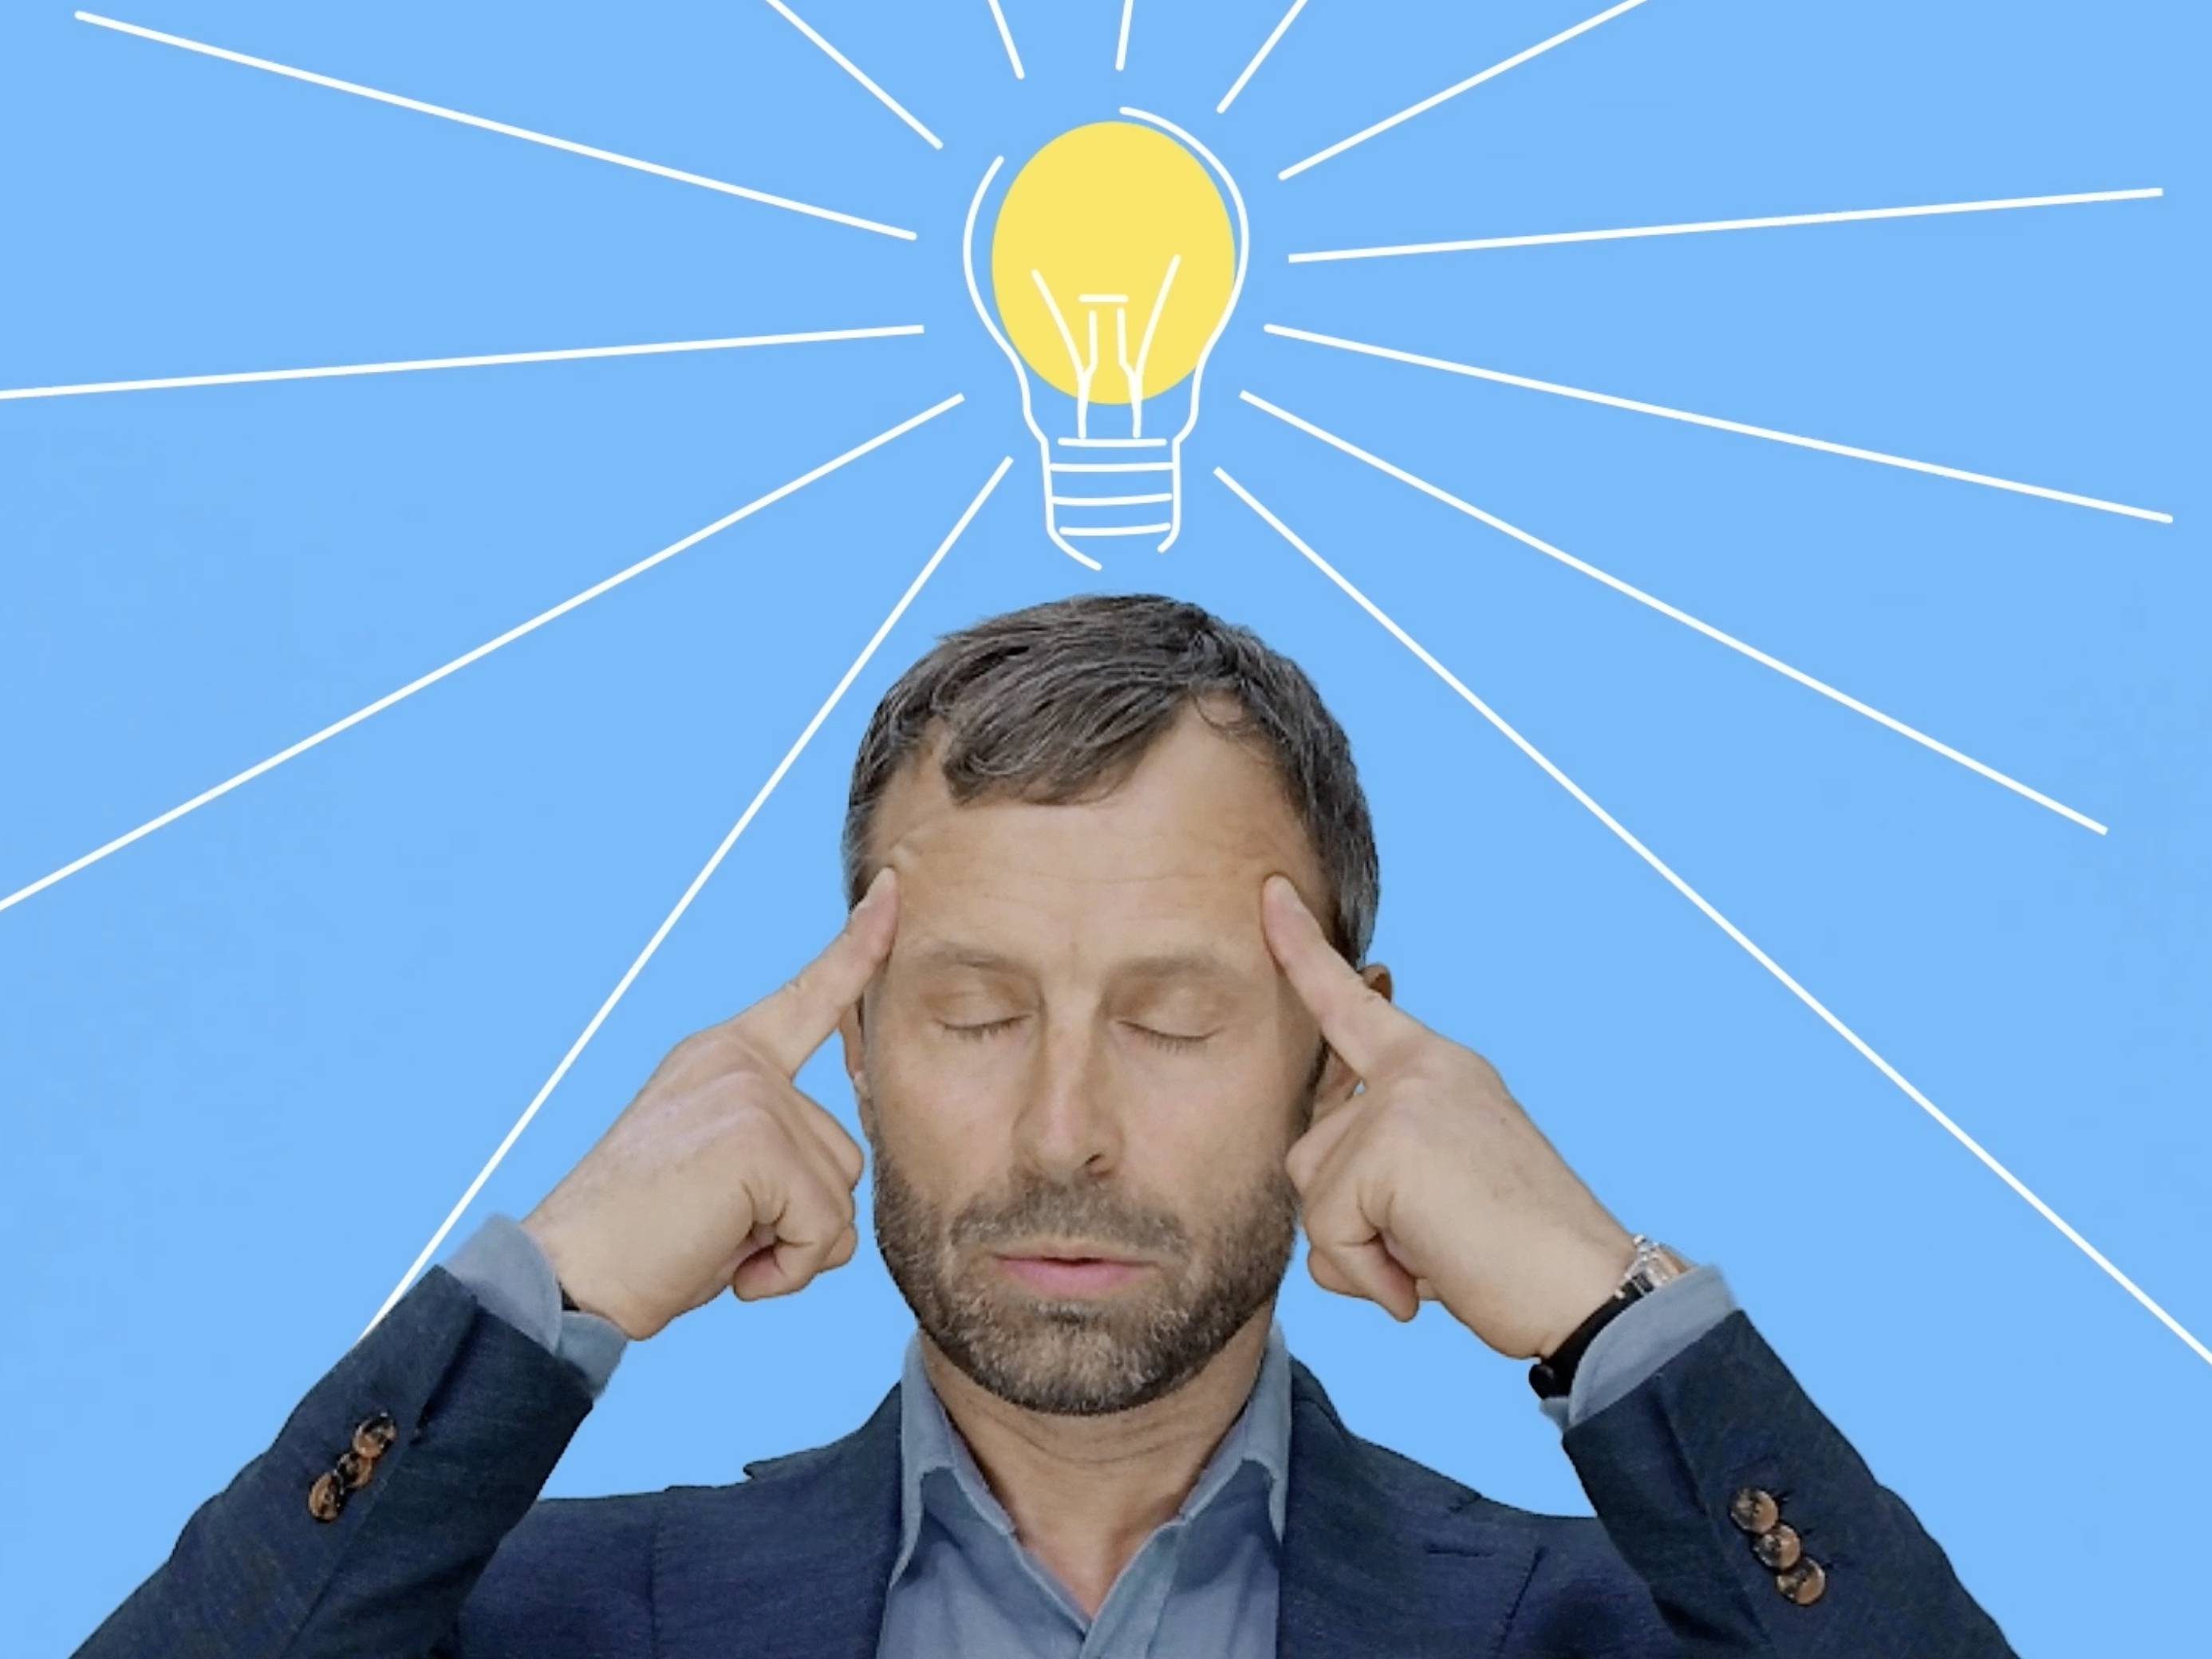 Image of the torso of a man in a suit holding his forehead with both index fingers in front of a light blue background. Above his head a drawn light bulb.